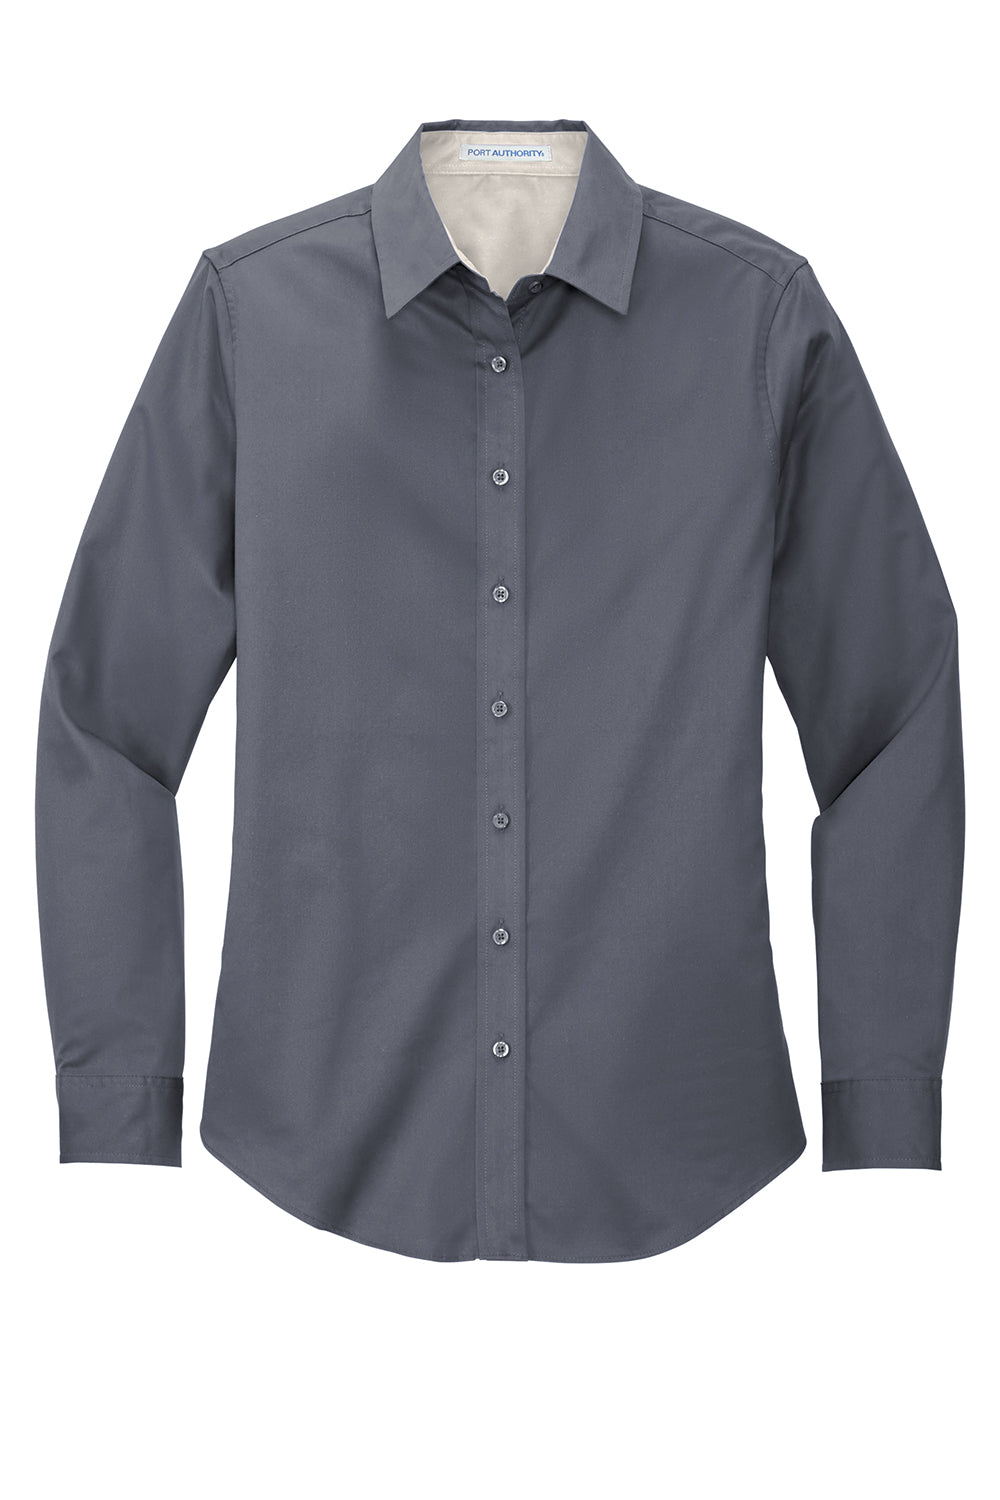 Port Authority L608 Womens Easy Care Wrinkle Resistant Long Sleeve Button Down Shirt Steel Grey Flat Front